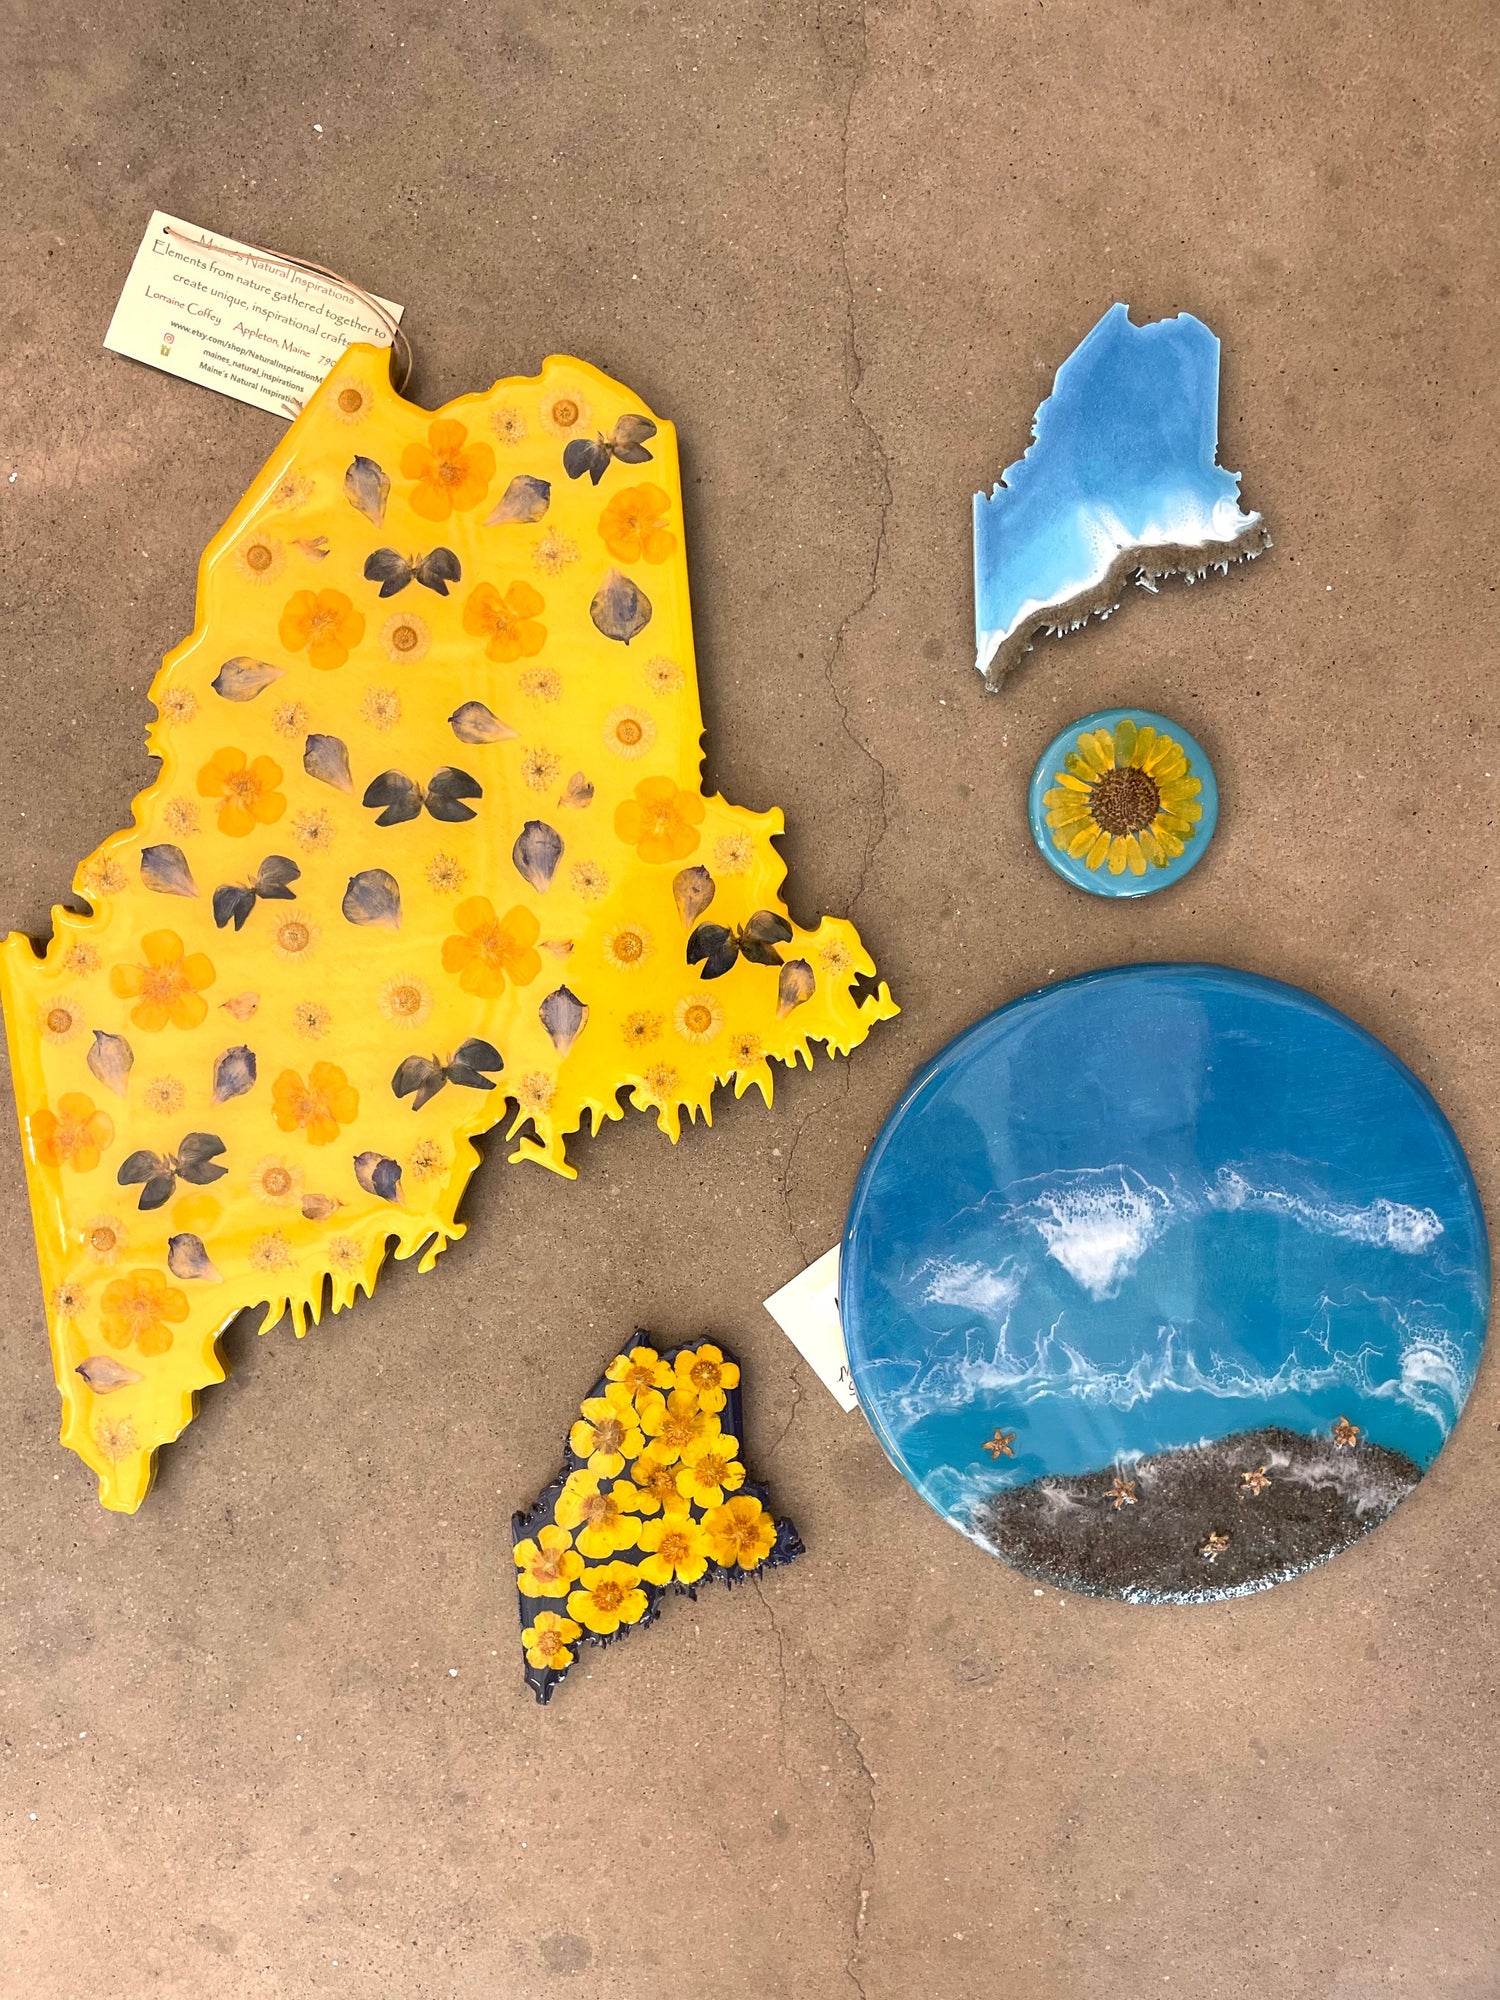 Colorful Maine-themed resin art by Maine's Natural Inspirations